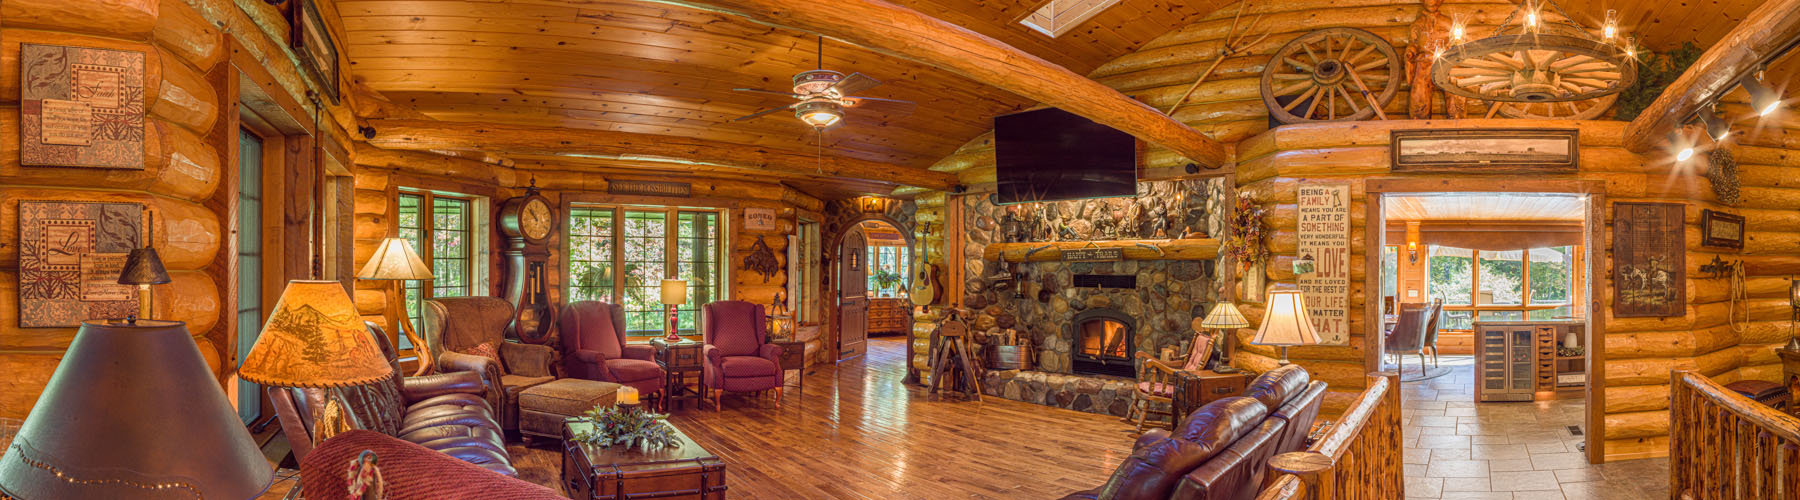 Luxury Cabin in the Woods 3440AR - Ranch